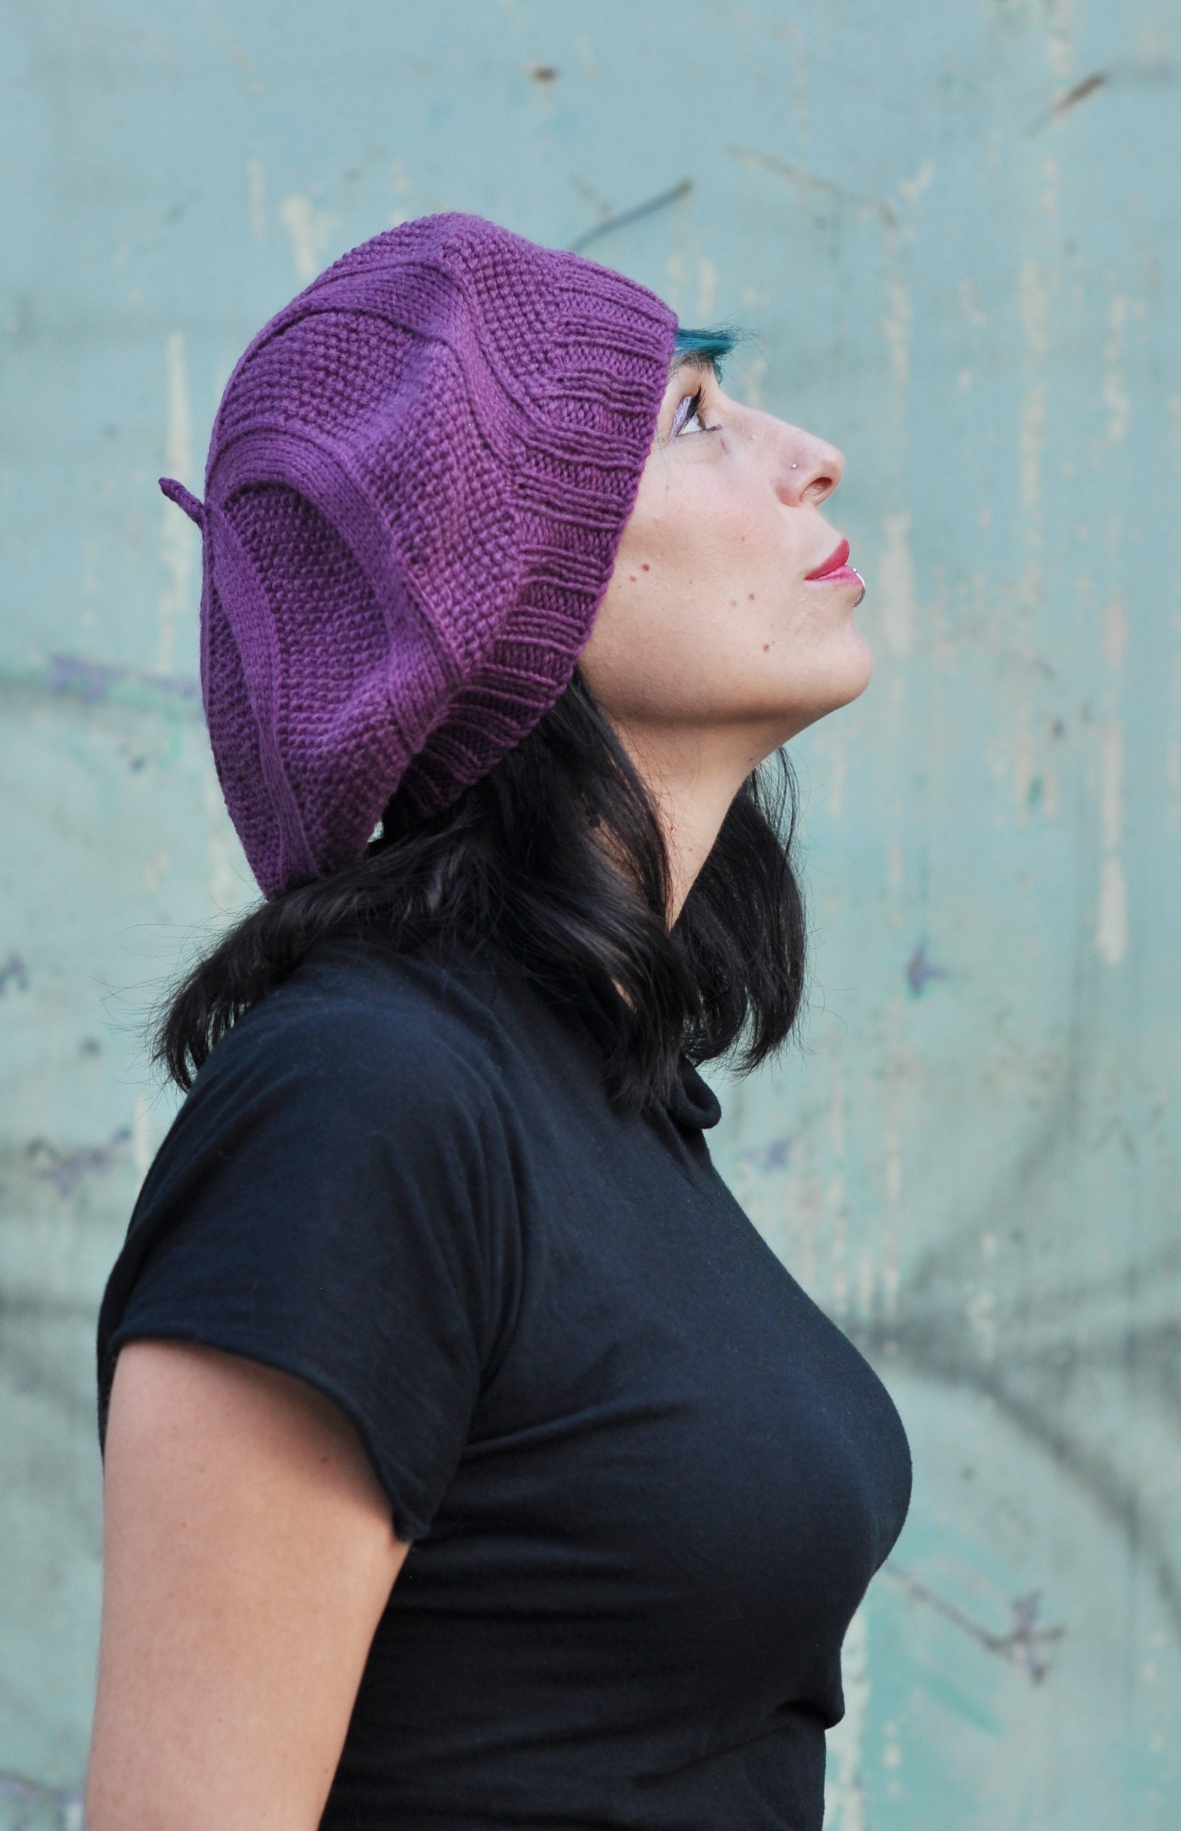 Coldharbour Twist beret knitting pattern